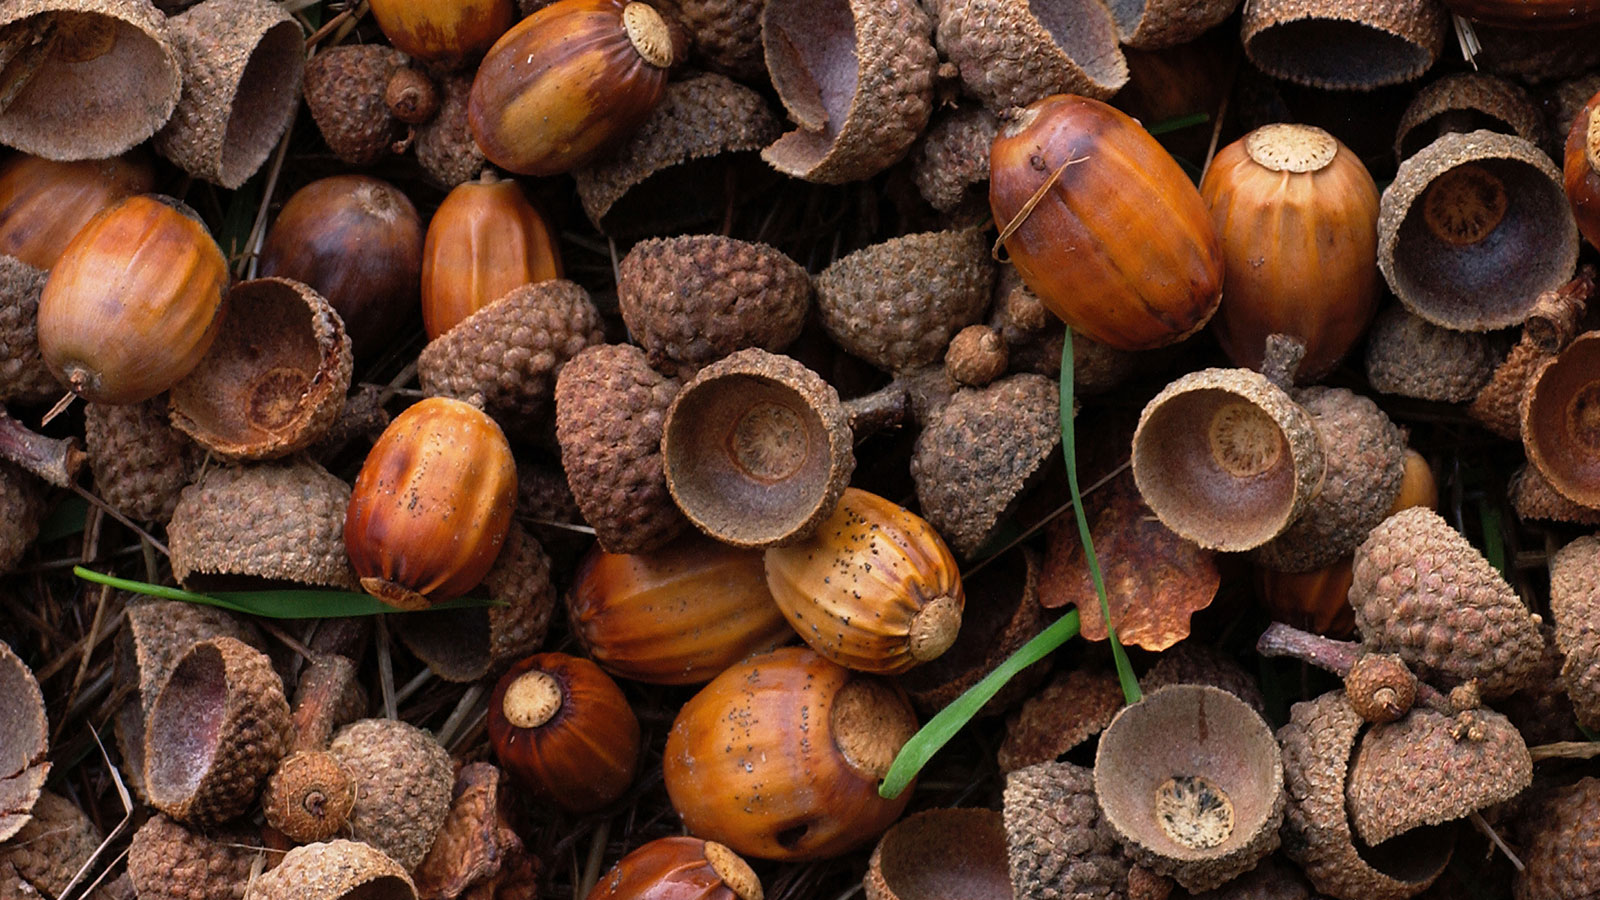 Foraging and Feasting on Fall Acorns